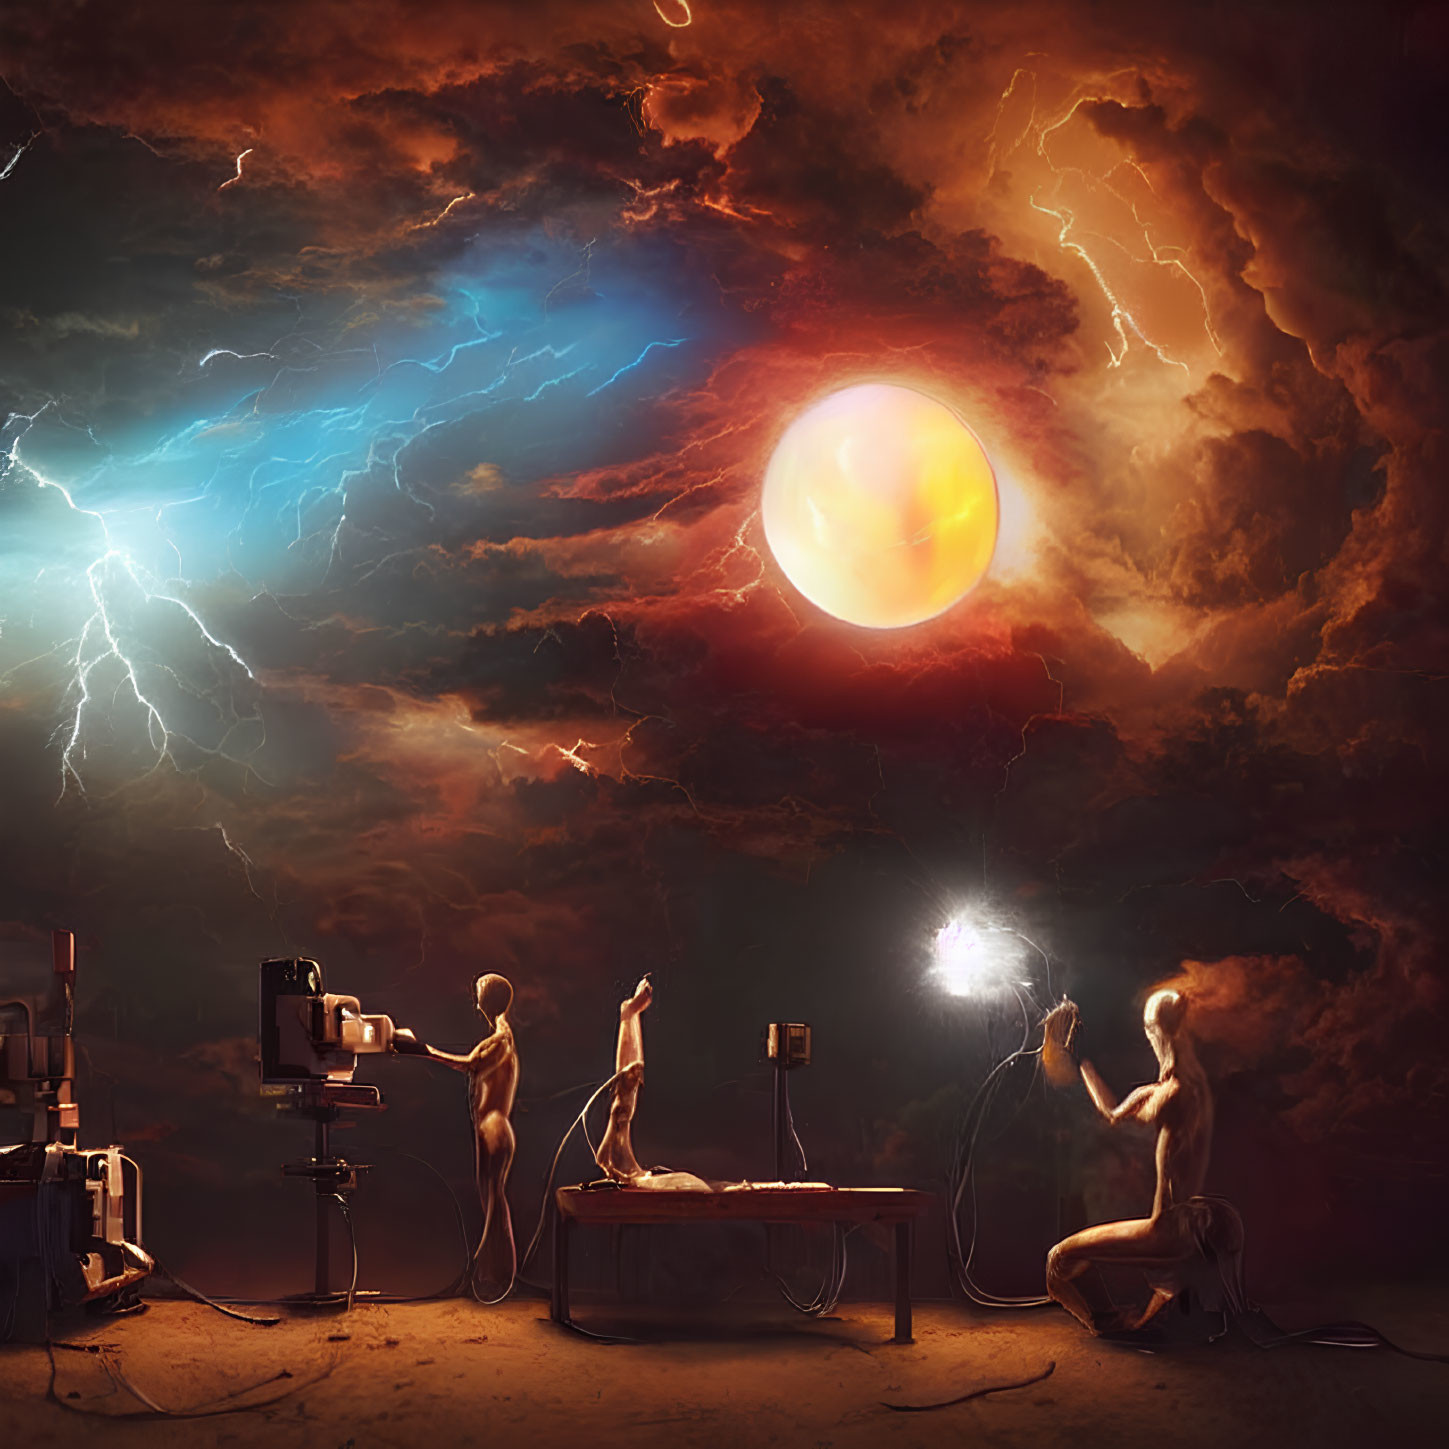 Surreal scene with mannequin-like figures, glowing orb, stormy clouds, and lightning